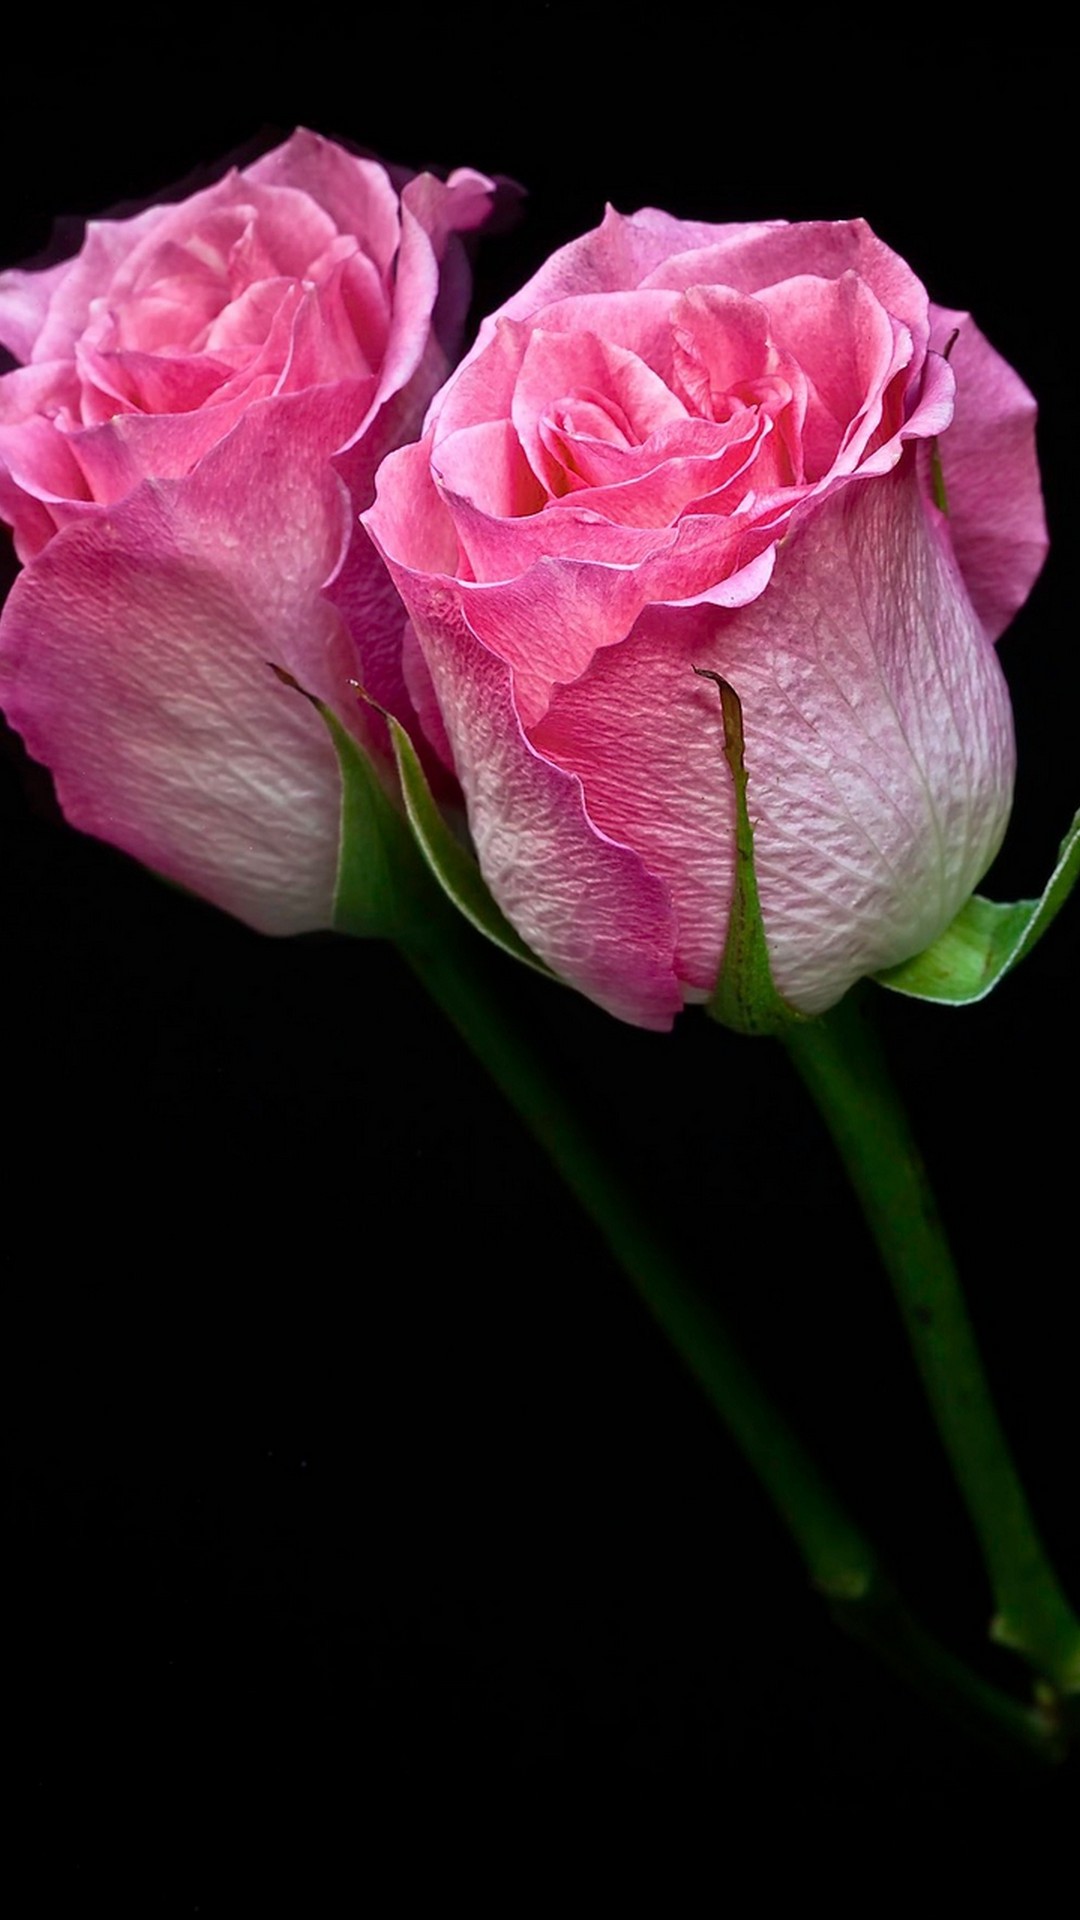 Pink Flower Wallpaper For Mobile Android - Good Night With Flowers - HD Wallpaper 